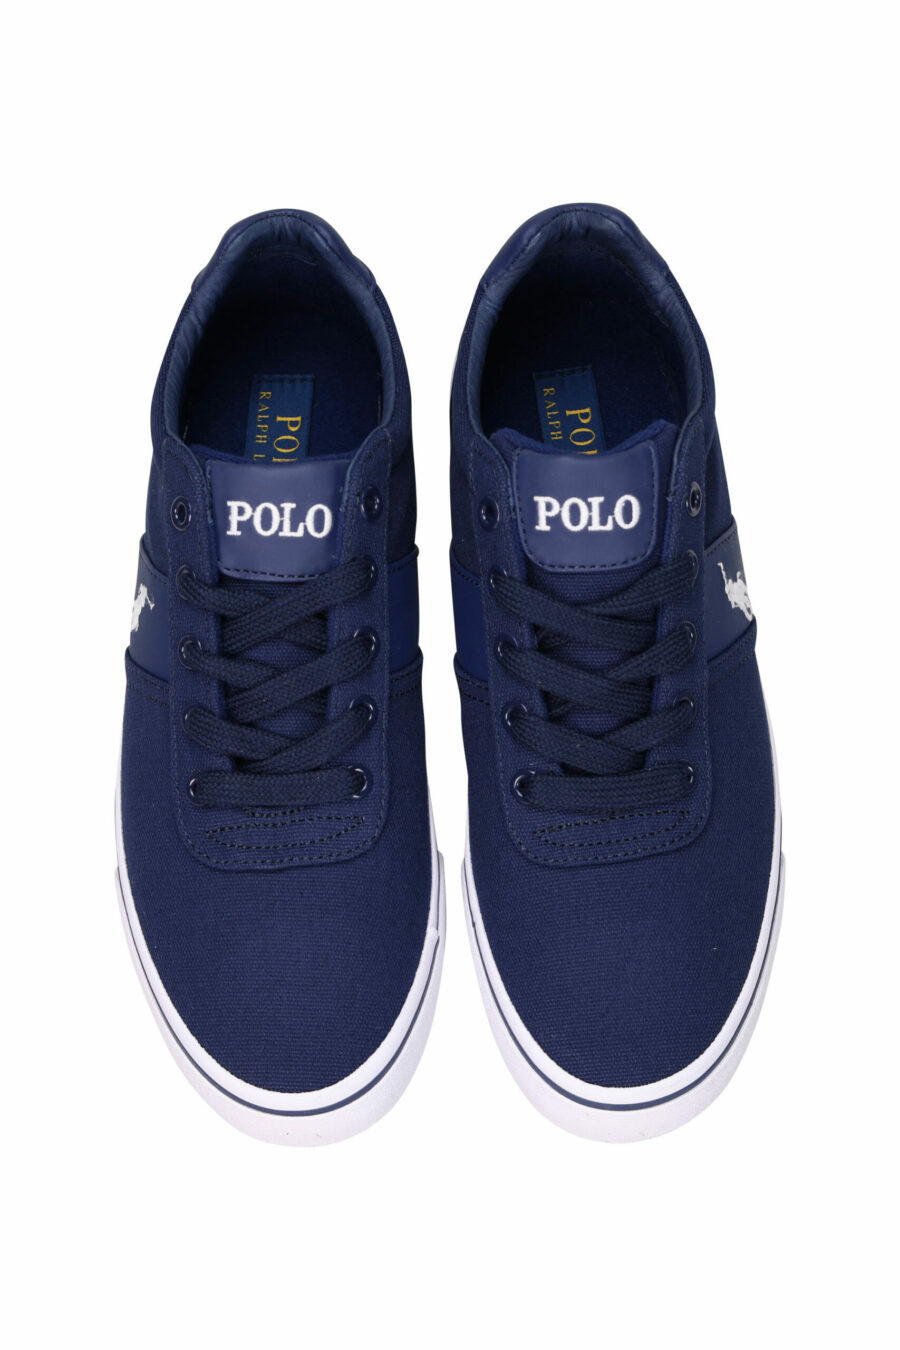 Dark blue trainers with mini-logo "polo" and white sole - 3611588439341 4 scaled